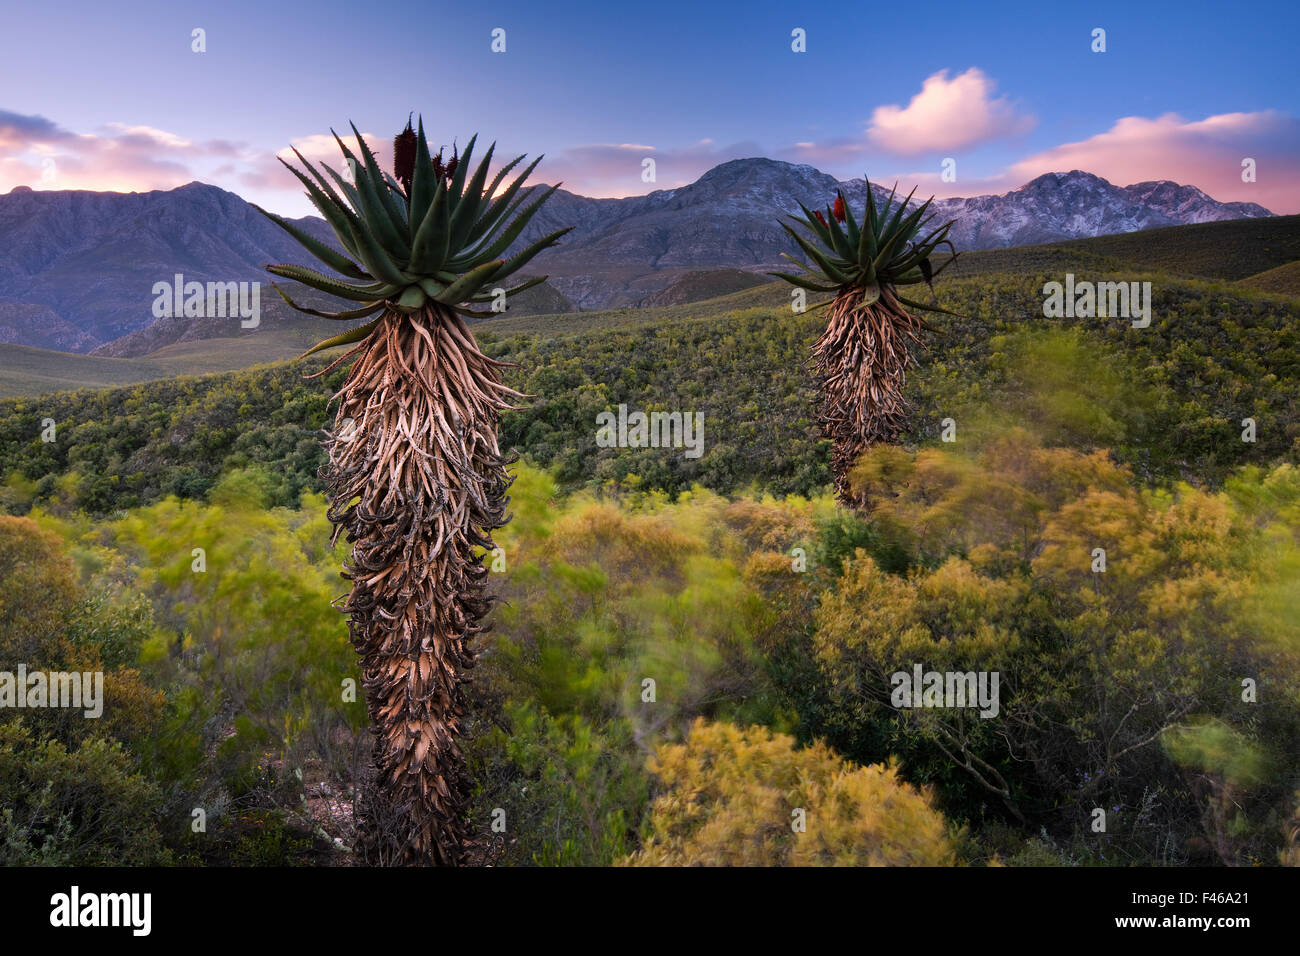 Aloes below the snow-capped peaks of the Swartberg. Near Calitzdorp, Western Cape, South Africa. June 2009. Stock Photo